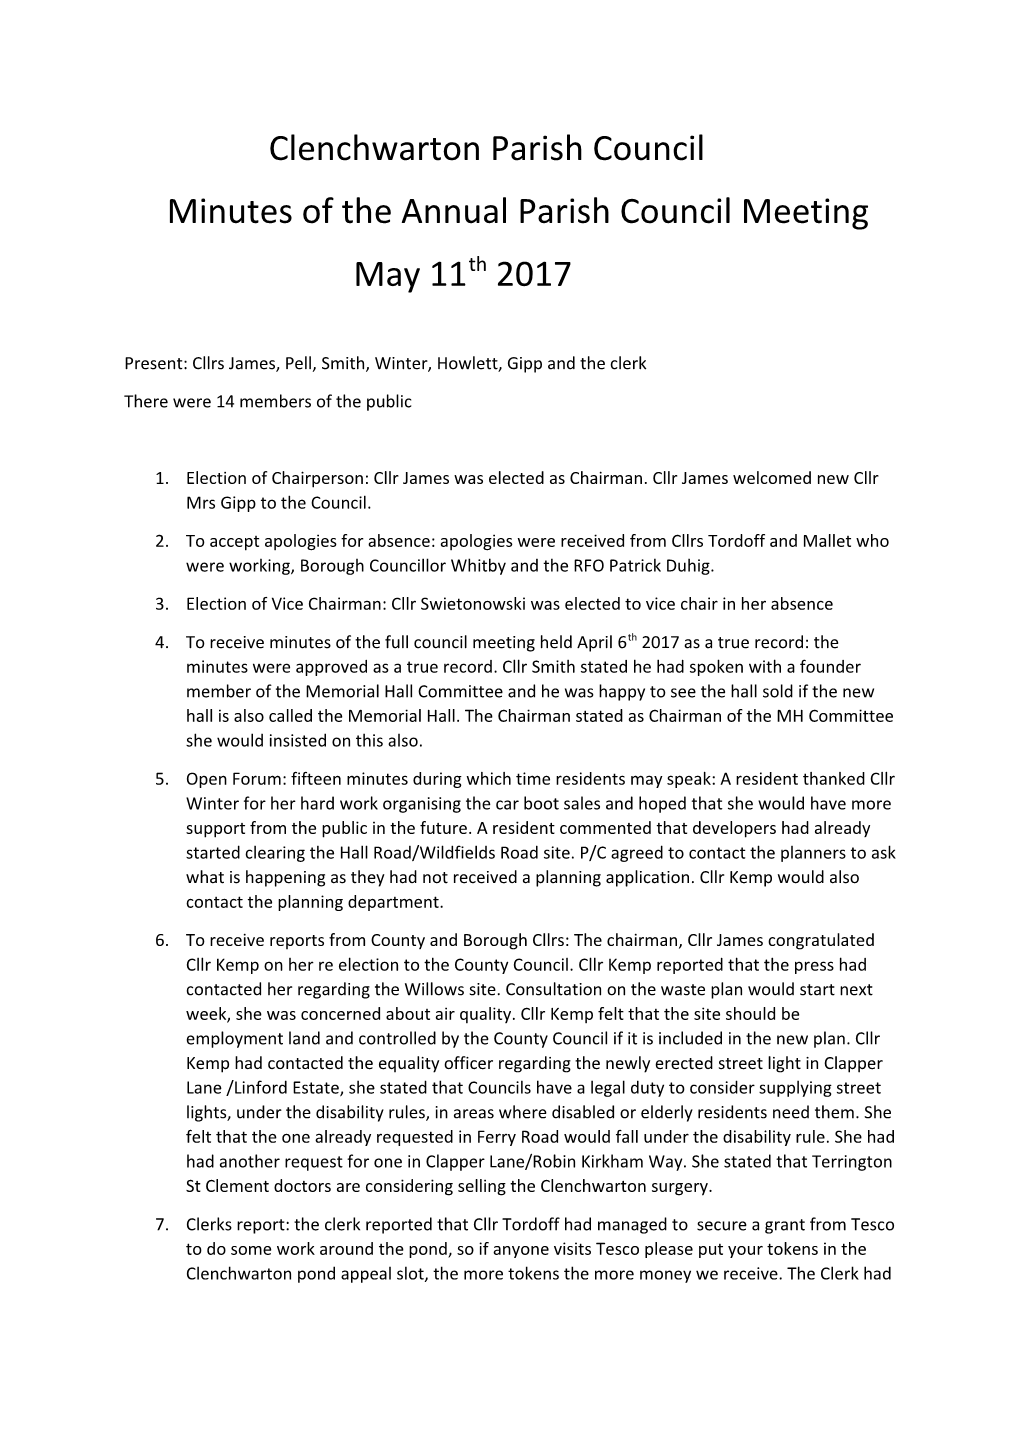 Minutes of the Annual Parish Council Meeting